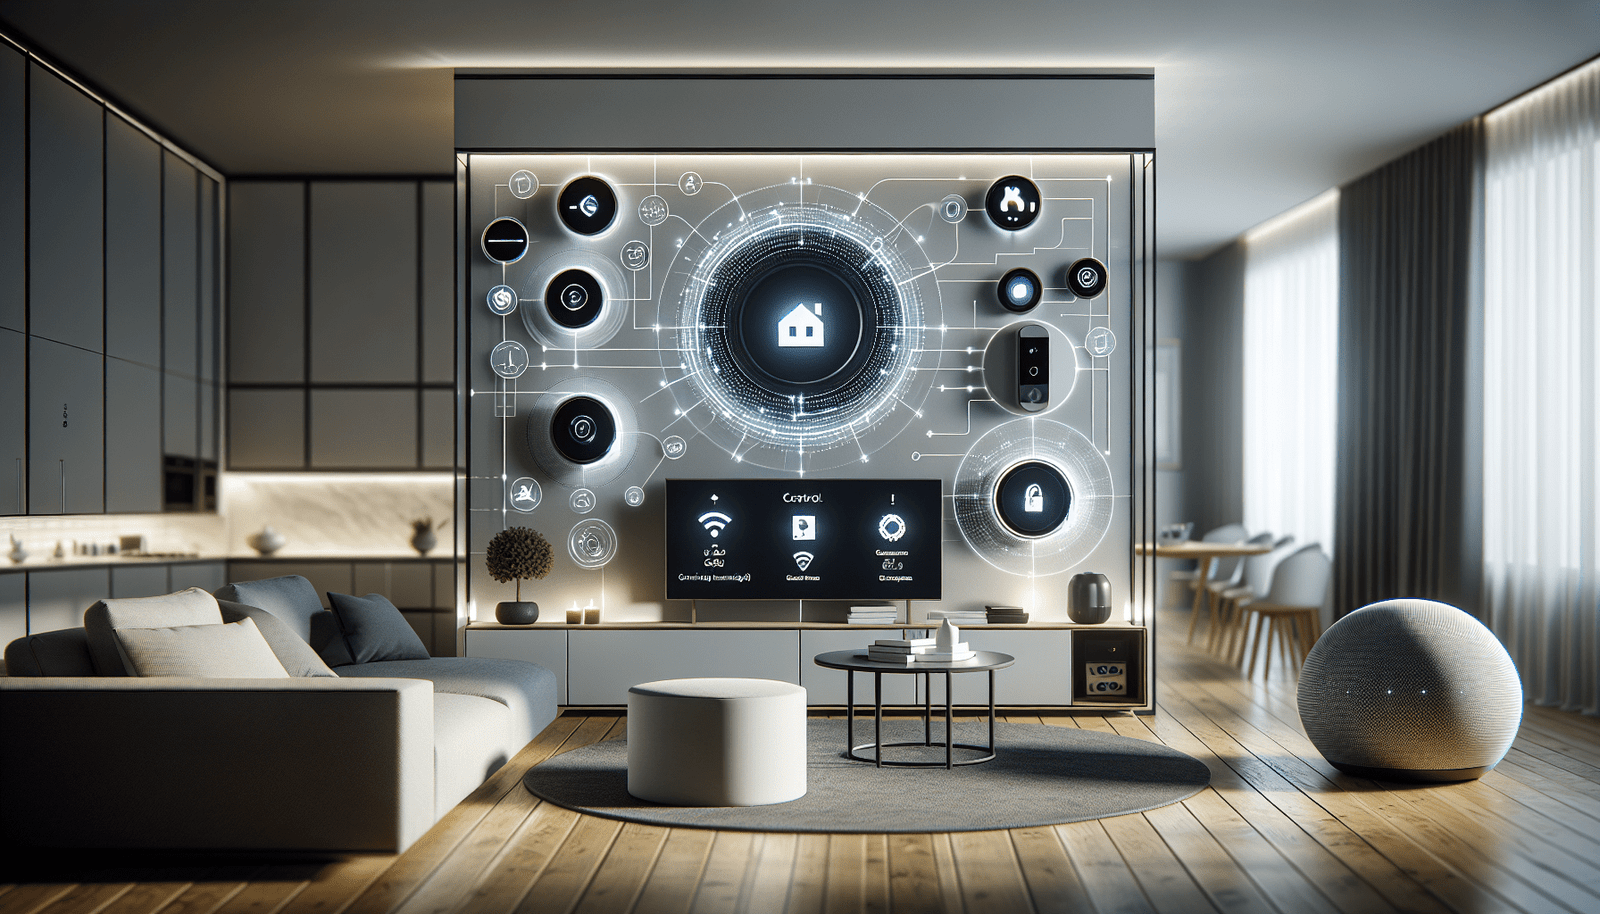 Why Are Homeowners Embracing Smart Home Technology?